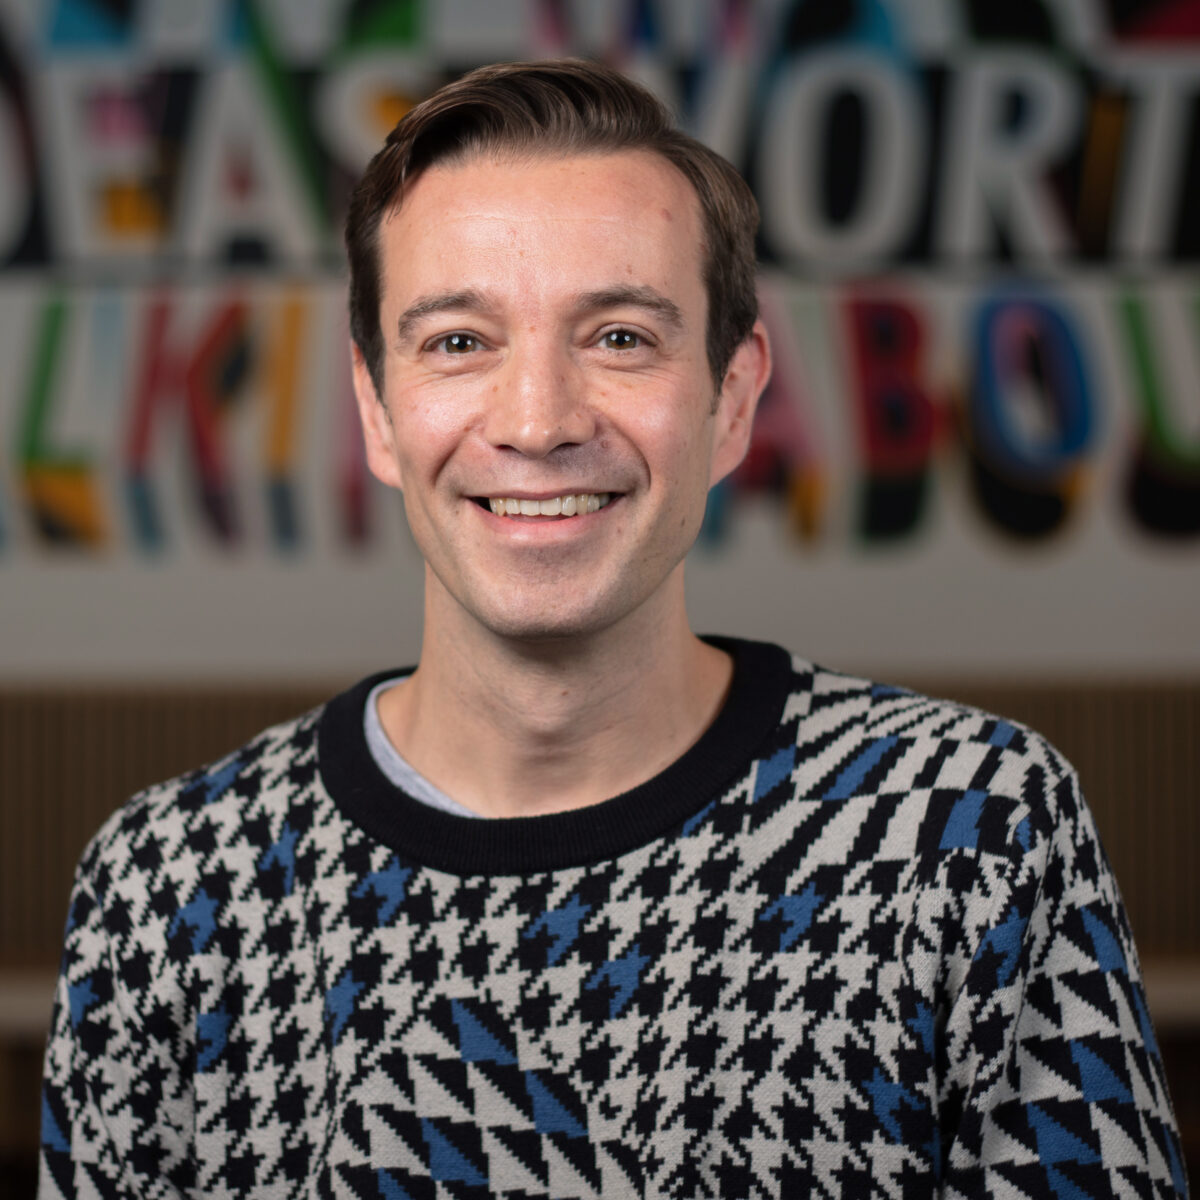 Photograph of Paul Greenwood. We Are Social has appointed a new global head of research as it commits to advancing its "cultural insight and social intelligence".